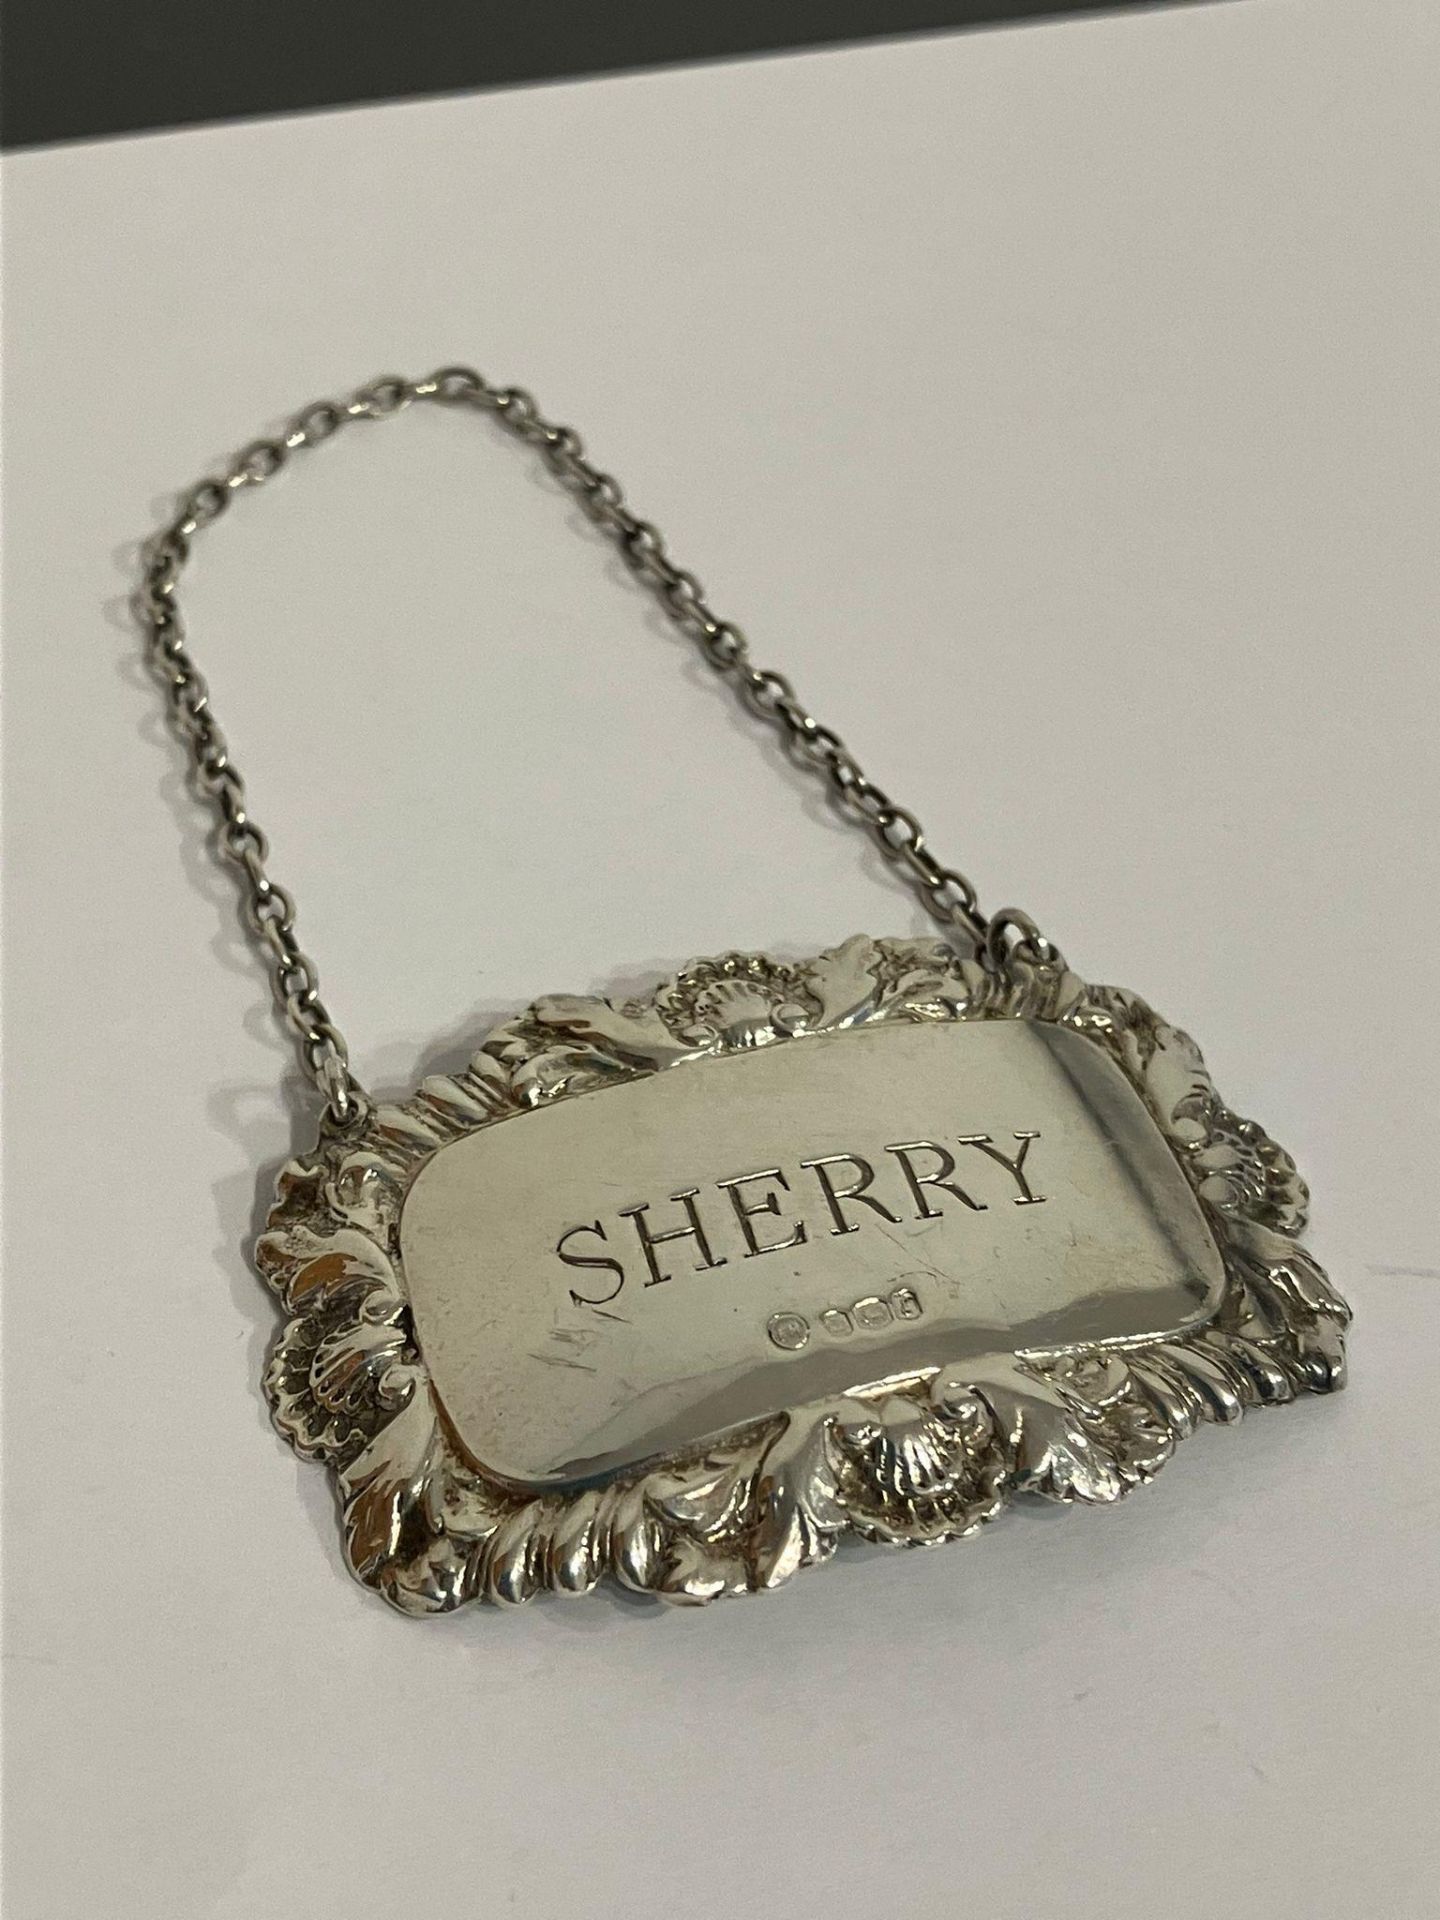 Vintage SHERRY SILVER DECANTER LABEL. Fully hallmarked. Having attractive leaf and Shell borders.